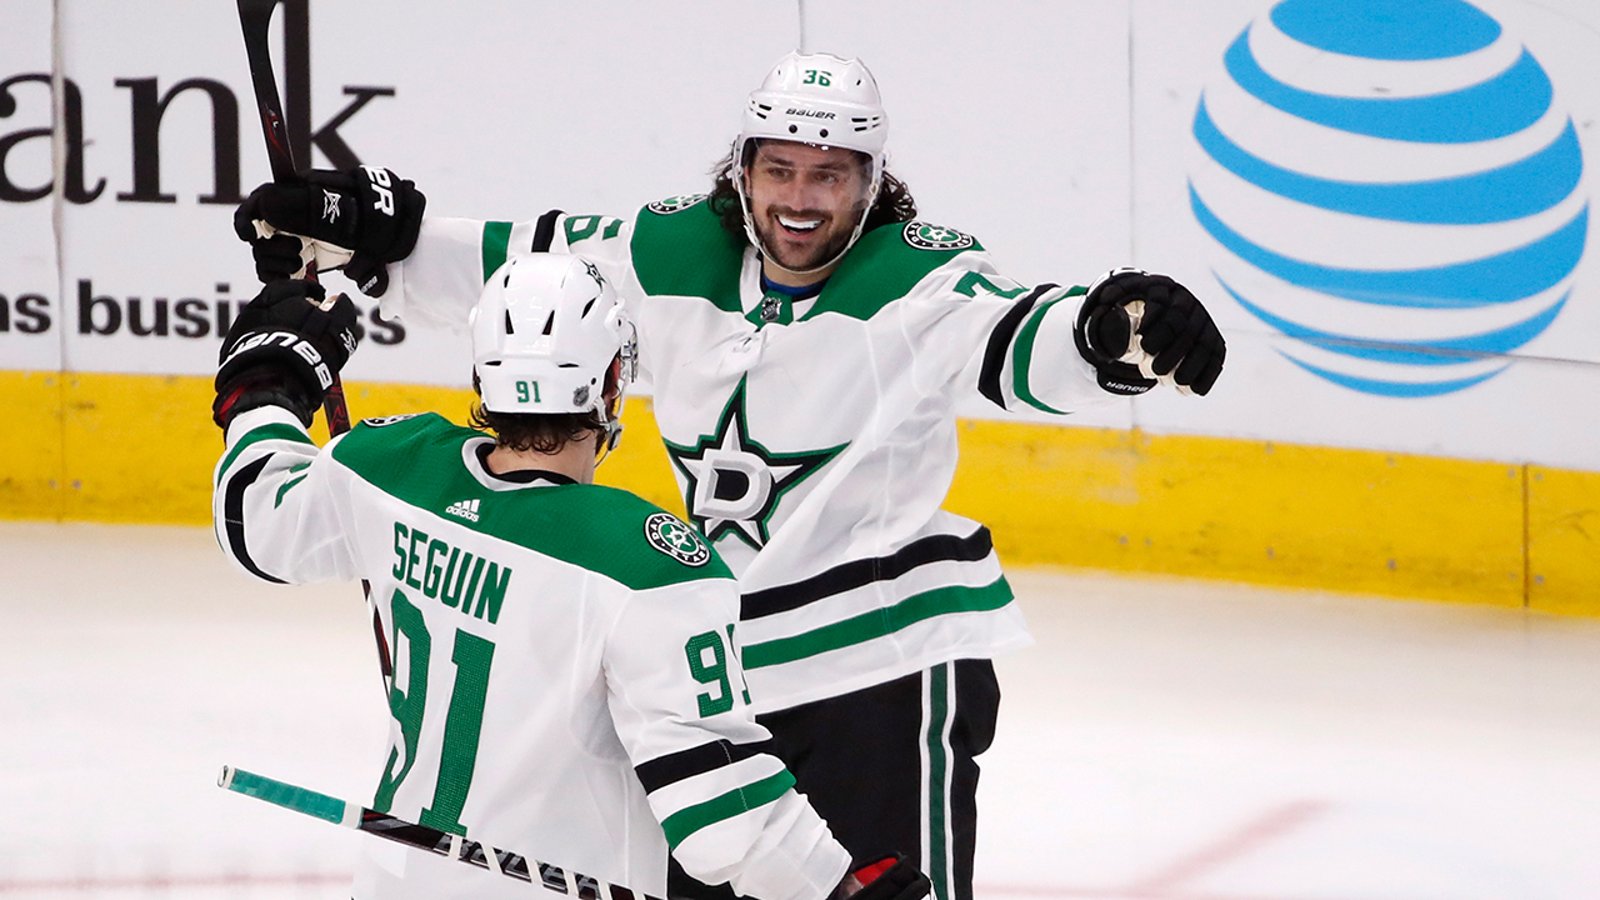 Breaking: Stars get surprise boost up front in pivotal game tonight! 